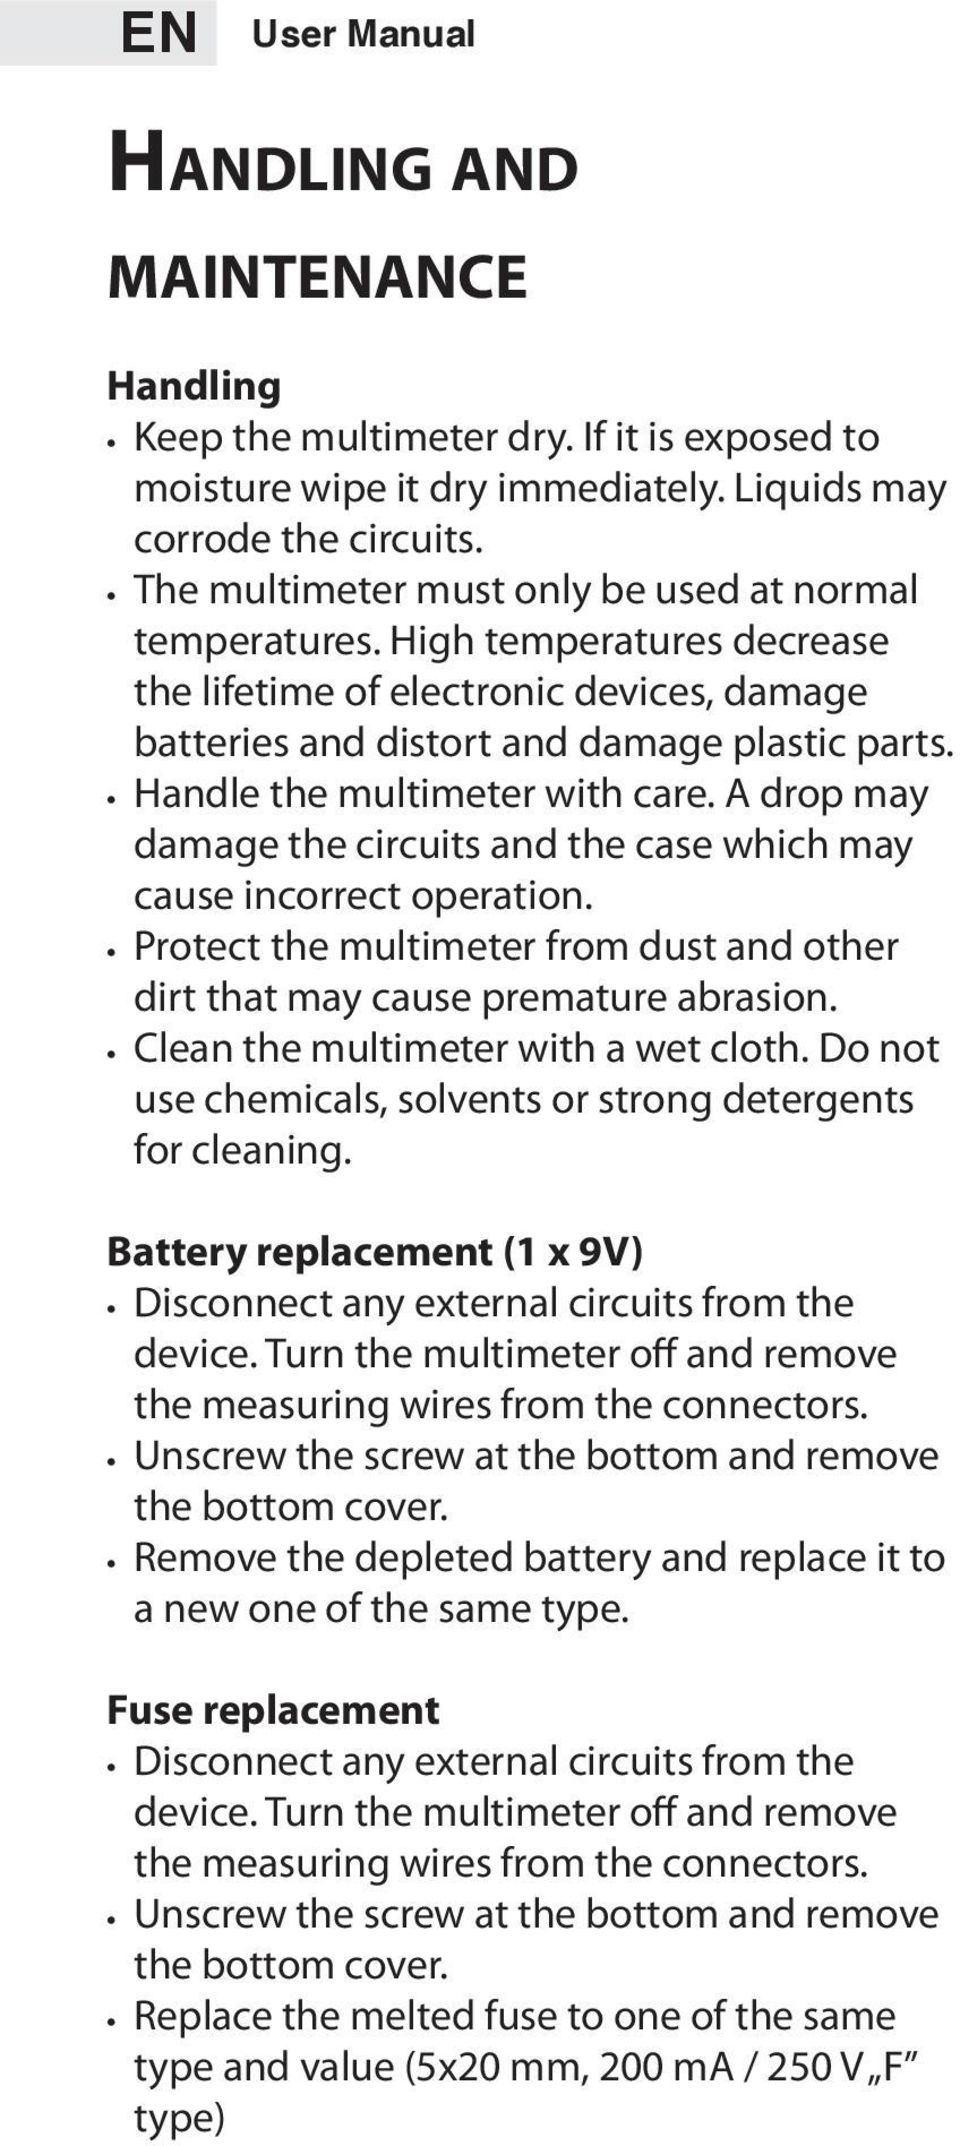 Handle the multimeter with care. A drop may damage the circuits and the case which may cause incorrect operation. Protect the multimeter from dust and other dirt that may cause premature abrasion.